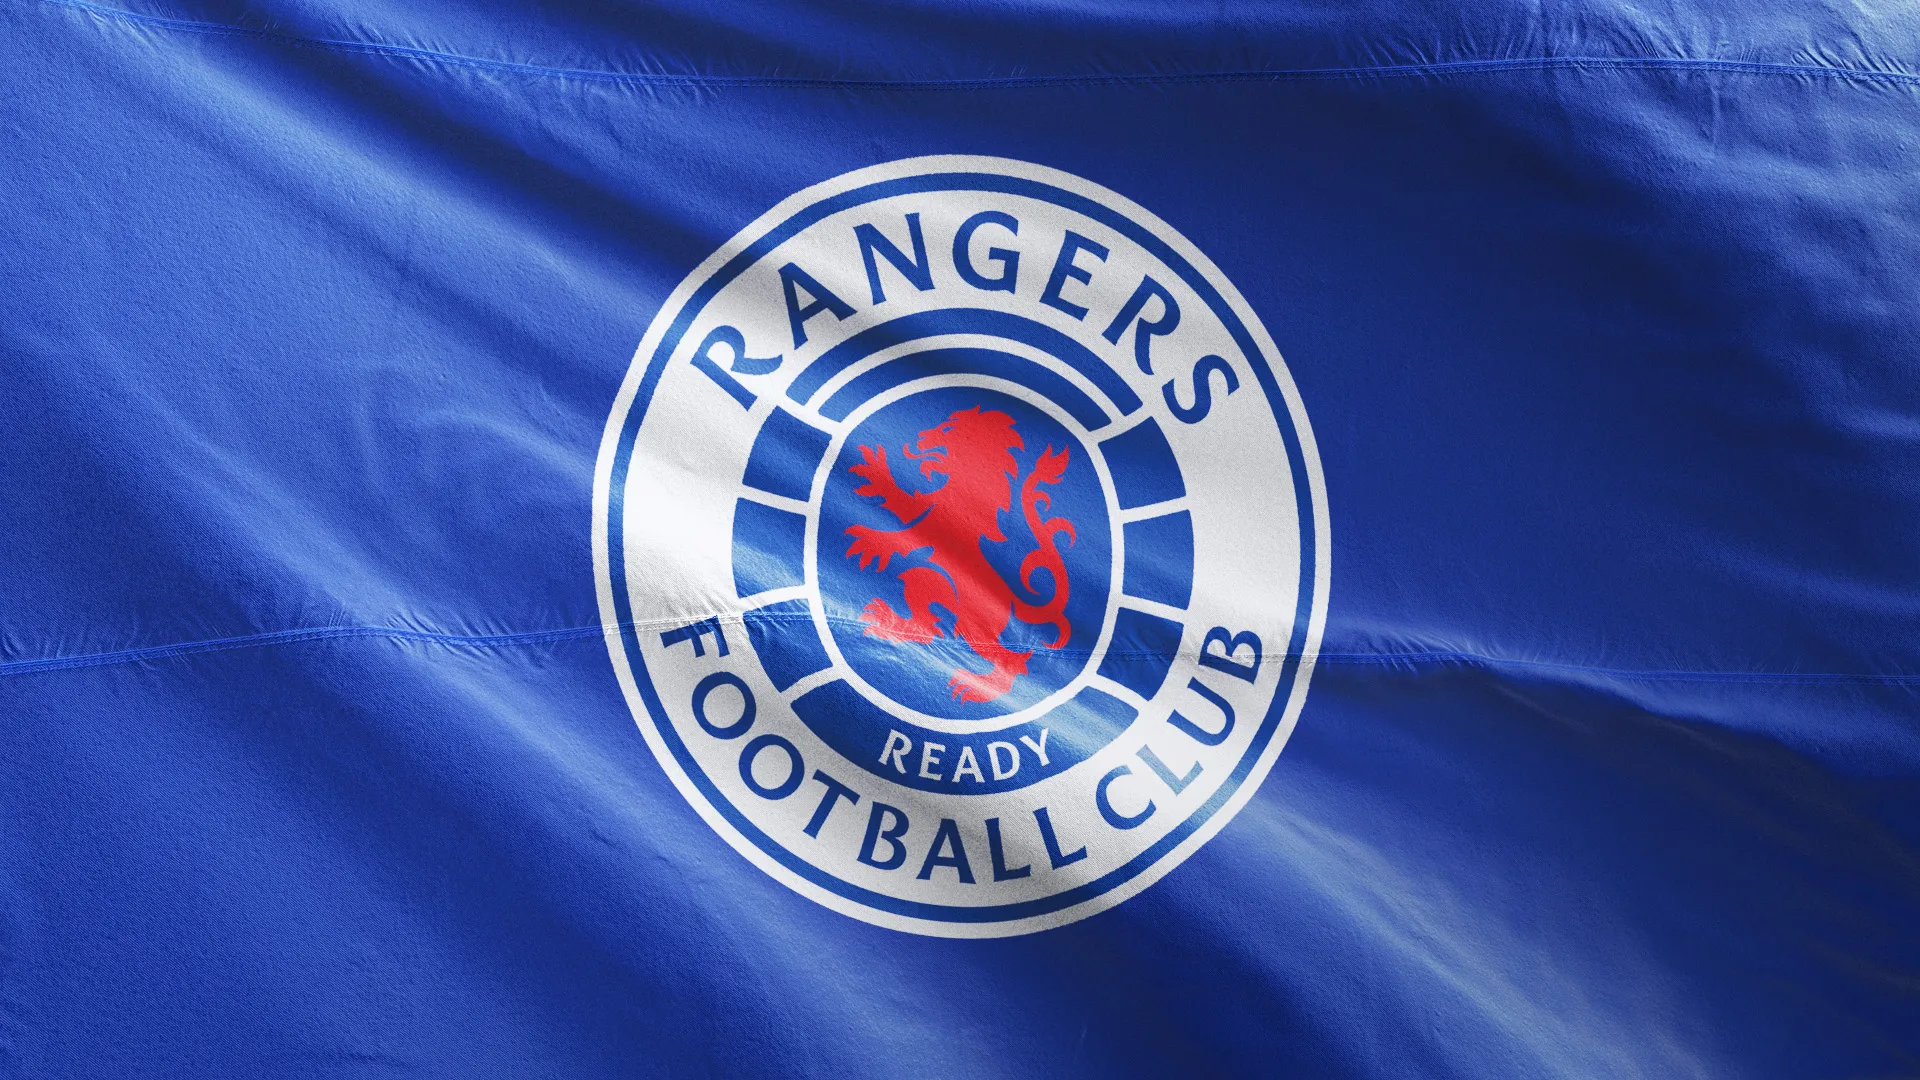 Rangers Fc Rebrand By See Saw Features New Crest And Custom Typeface By Lifelong Fan Craig Black